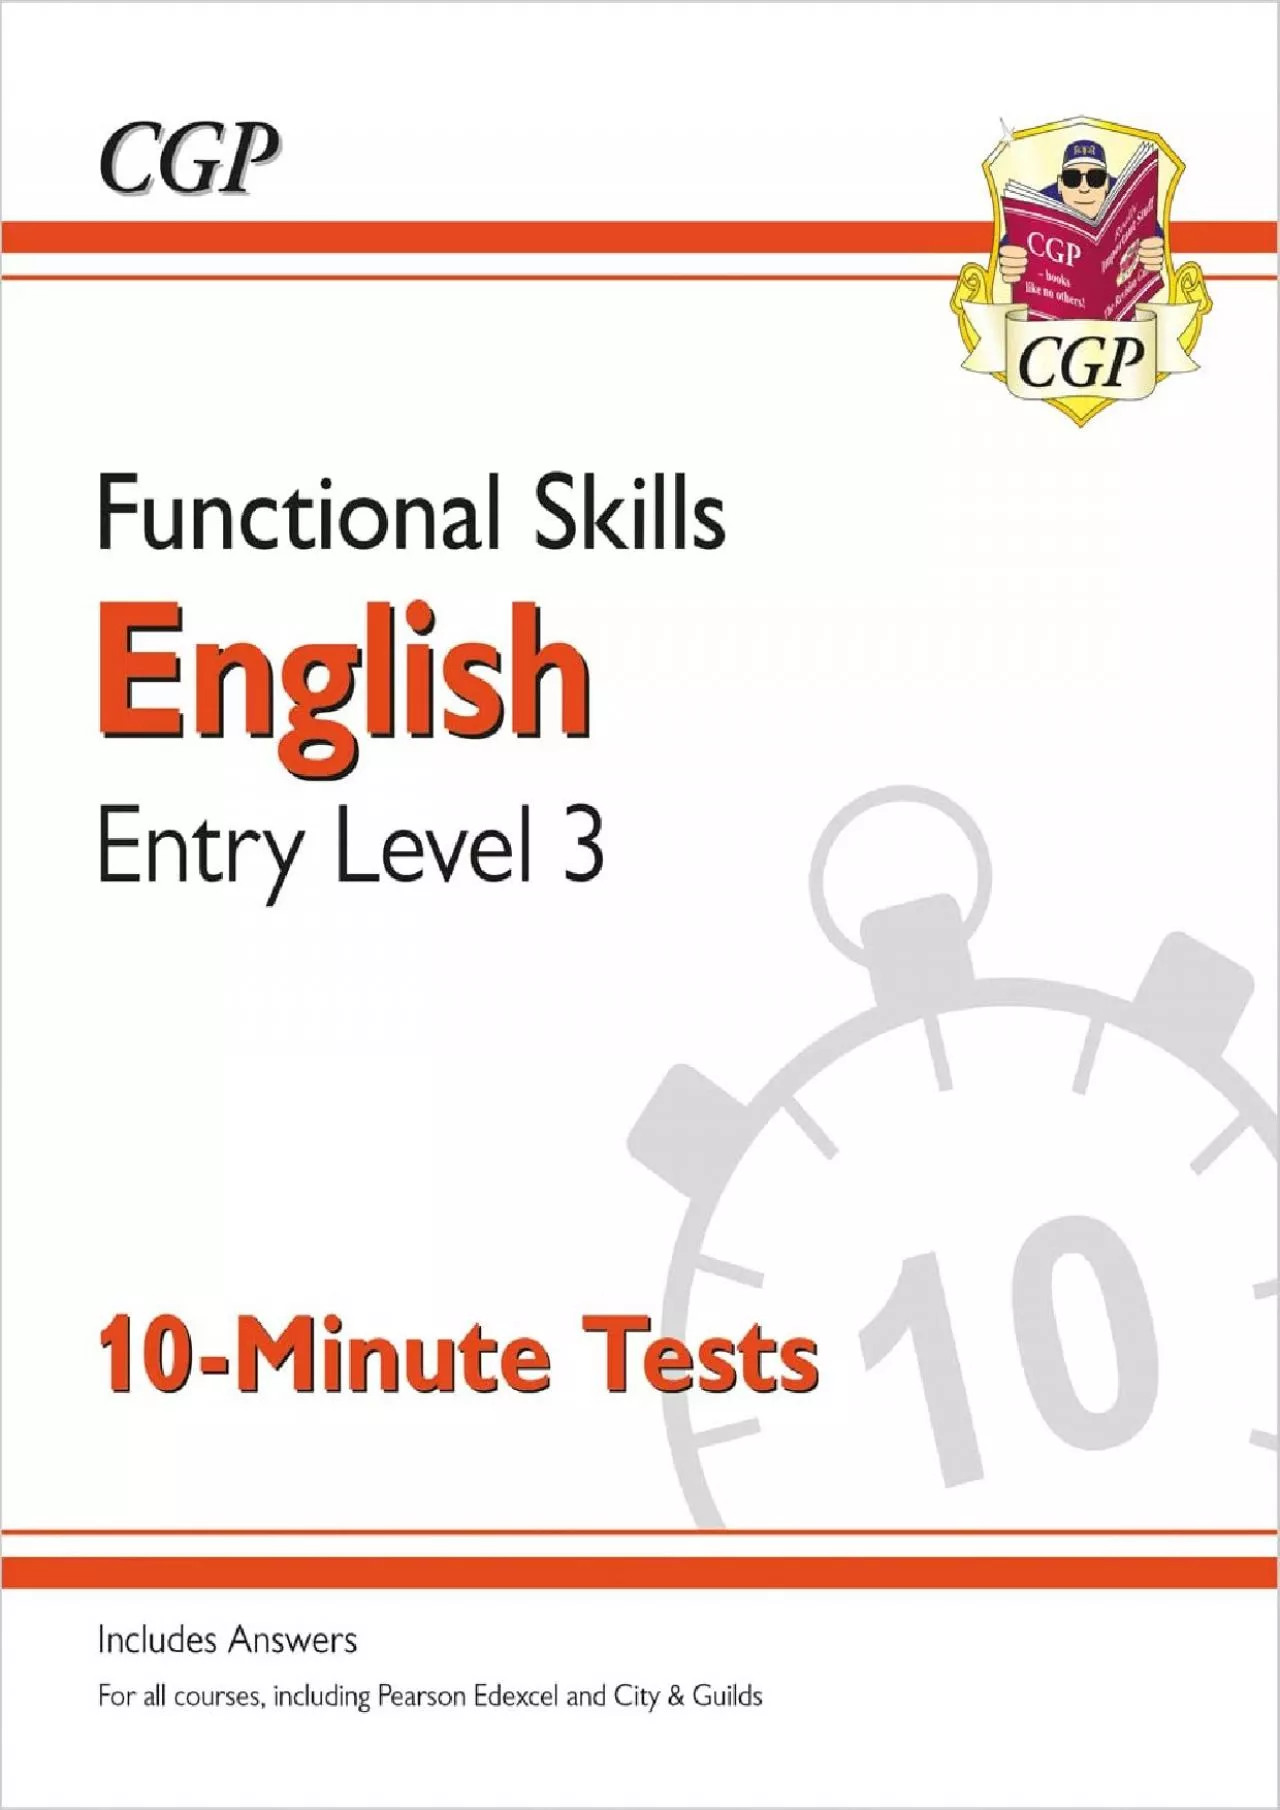 [READ] New Functional Skills English Entry Level 3 - 10 Minute Tests for 2021  beyond